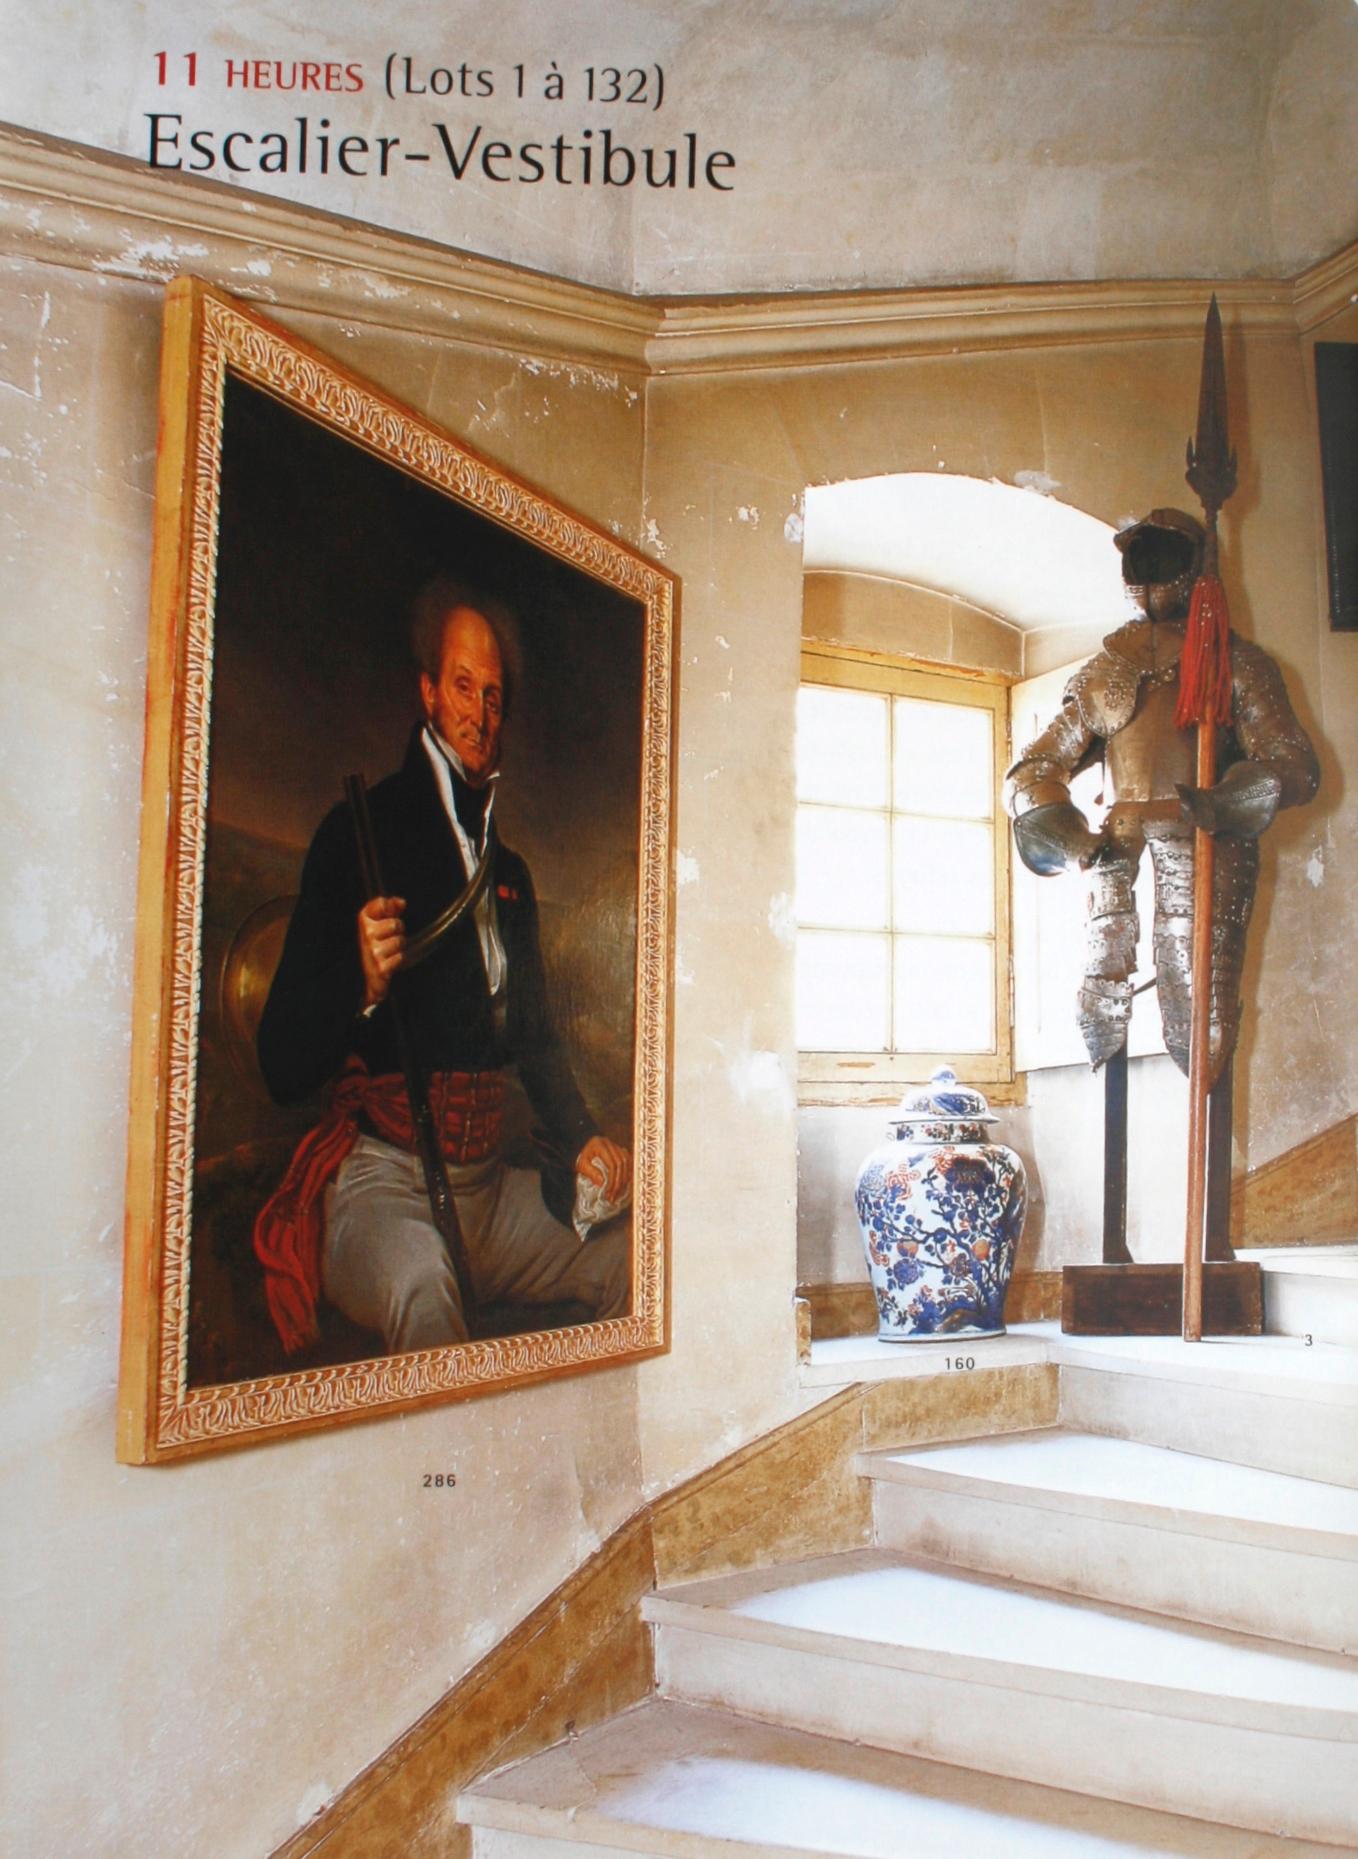 Christie’s: “Paris, Chateau de Gallerande”, March 2004, (Contents of Chateau de Gallerande). With 604 lots all photoed in color on 196 pp. Château de Gallerande is a castle in Pringe, in the municipality of Luche-Pringe, in the department of Sarthe.